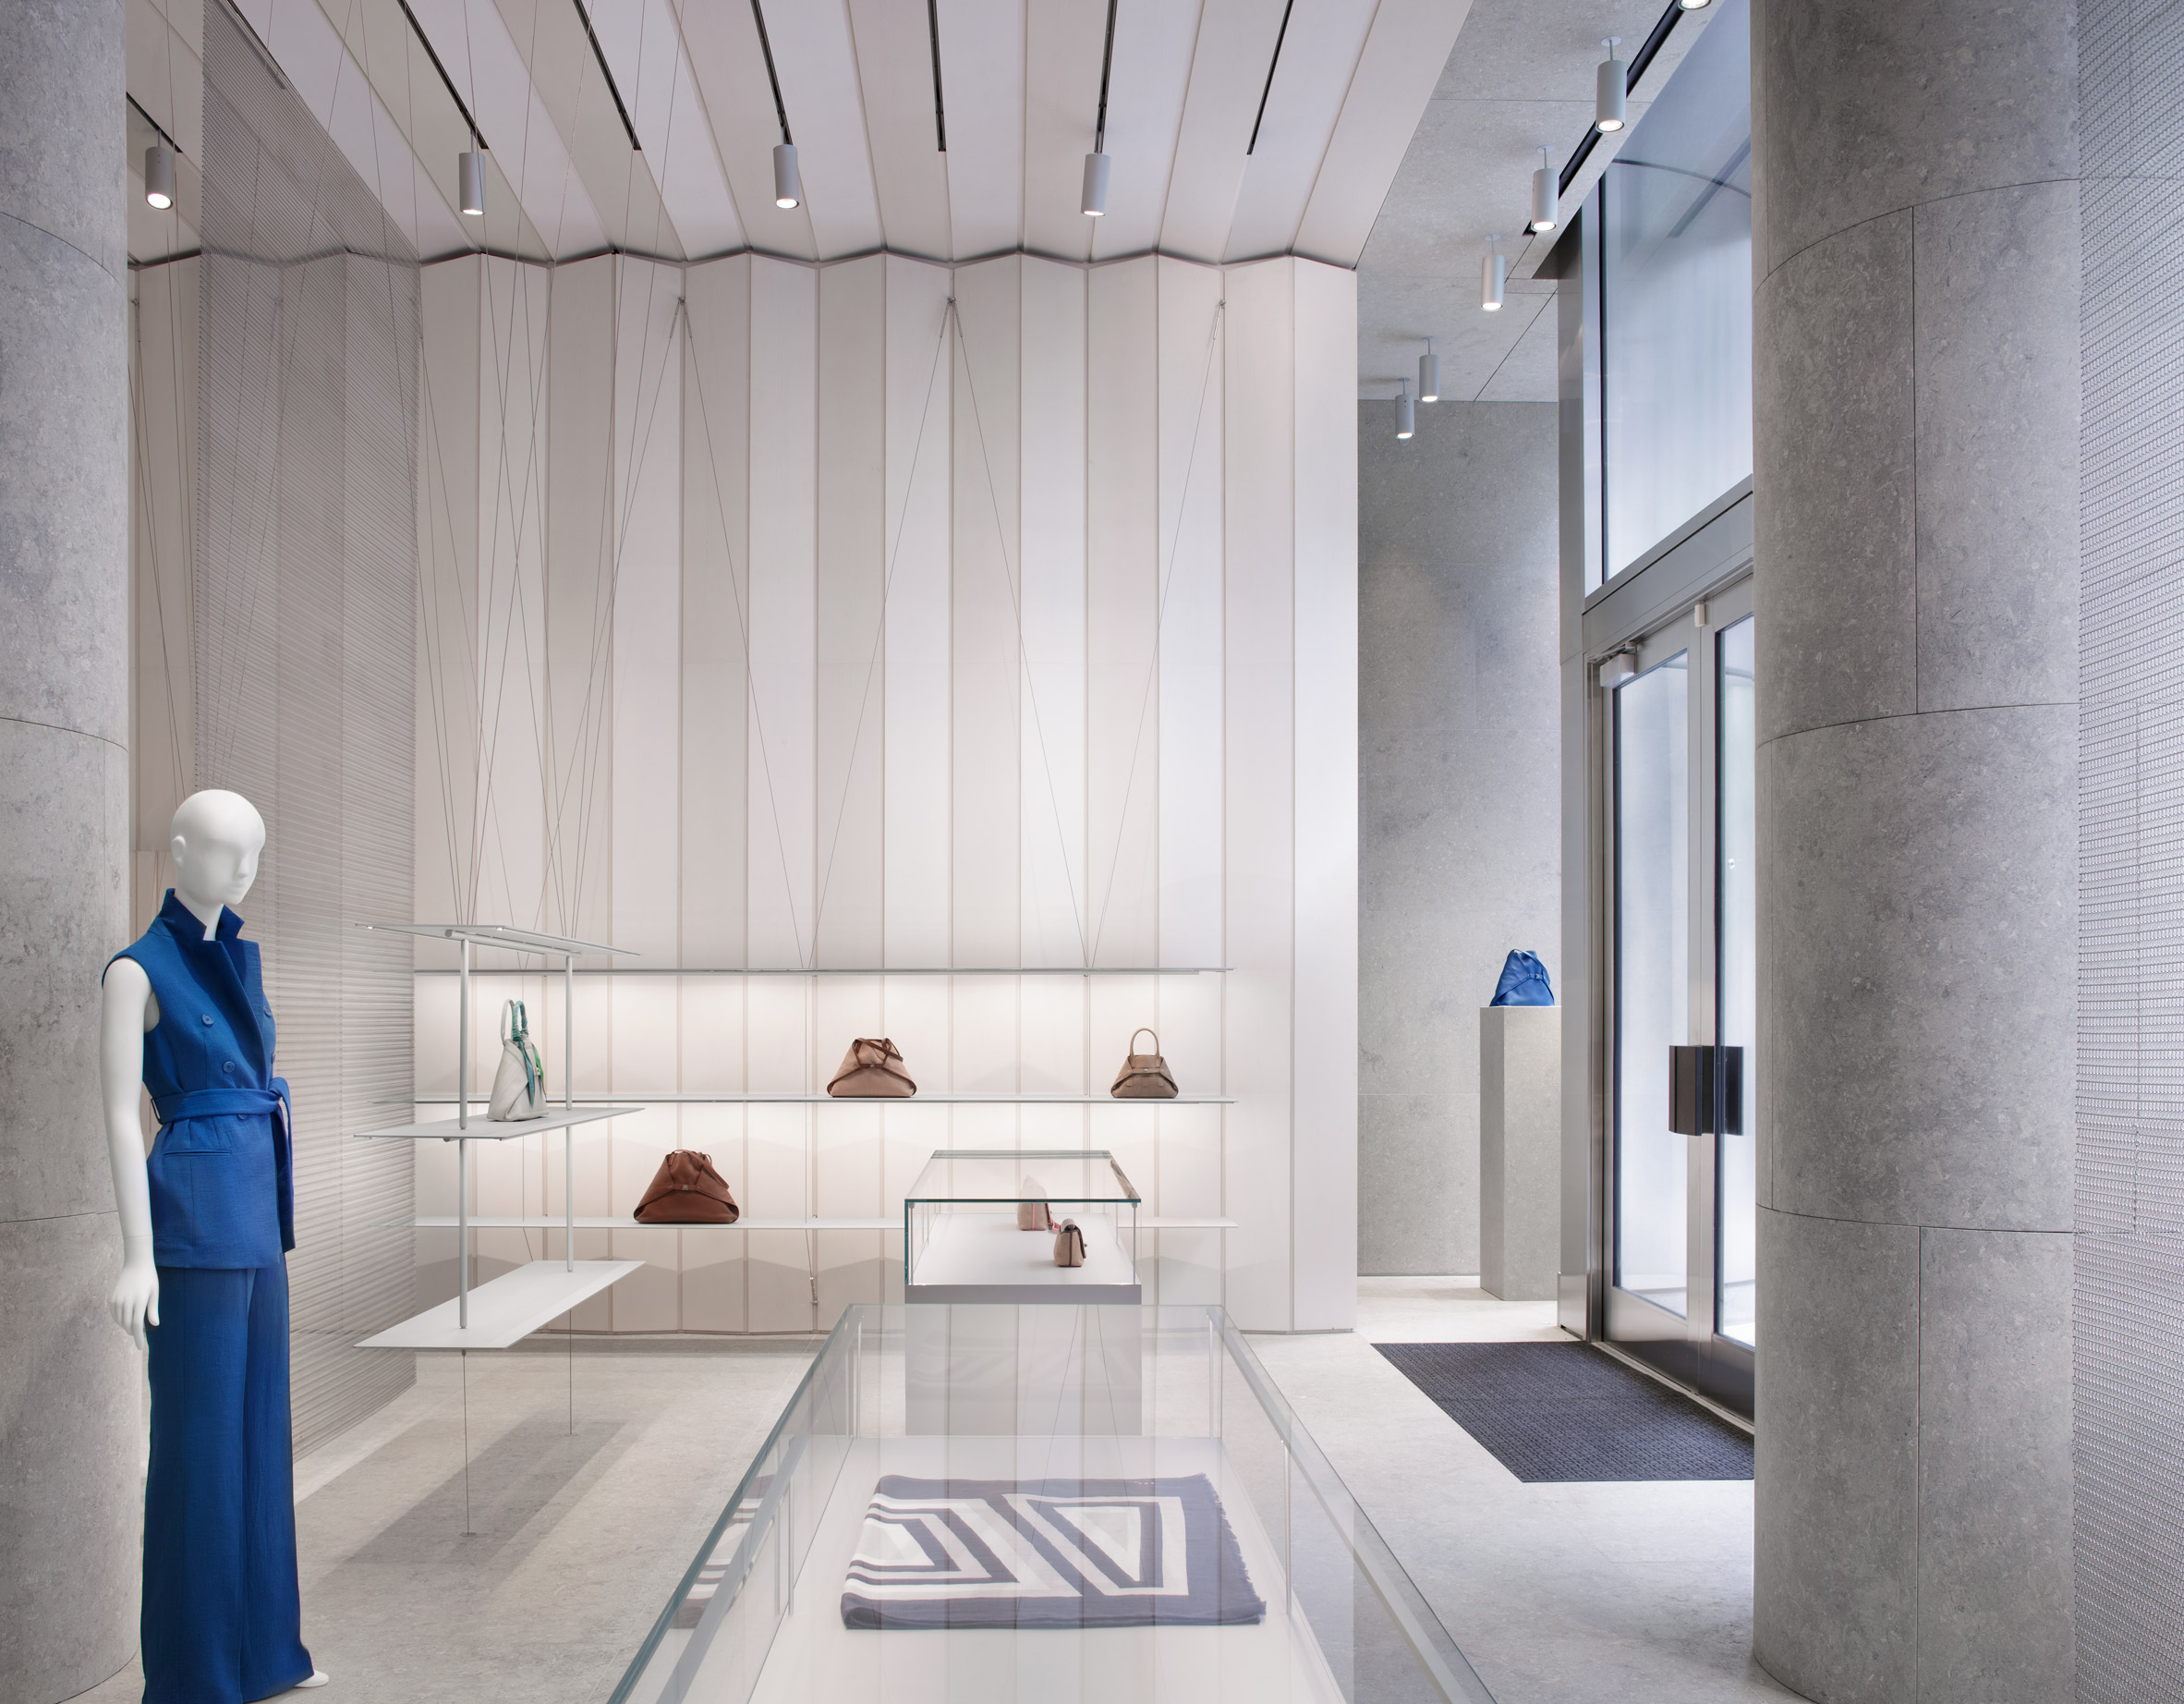 Boutique with pleated walls and floating shelves